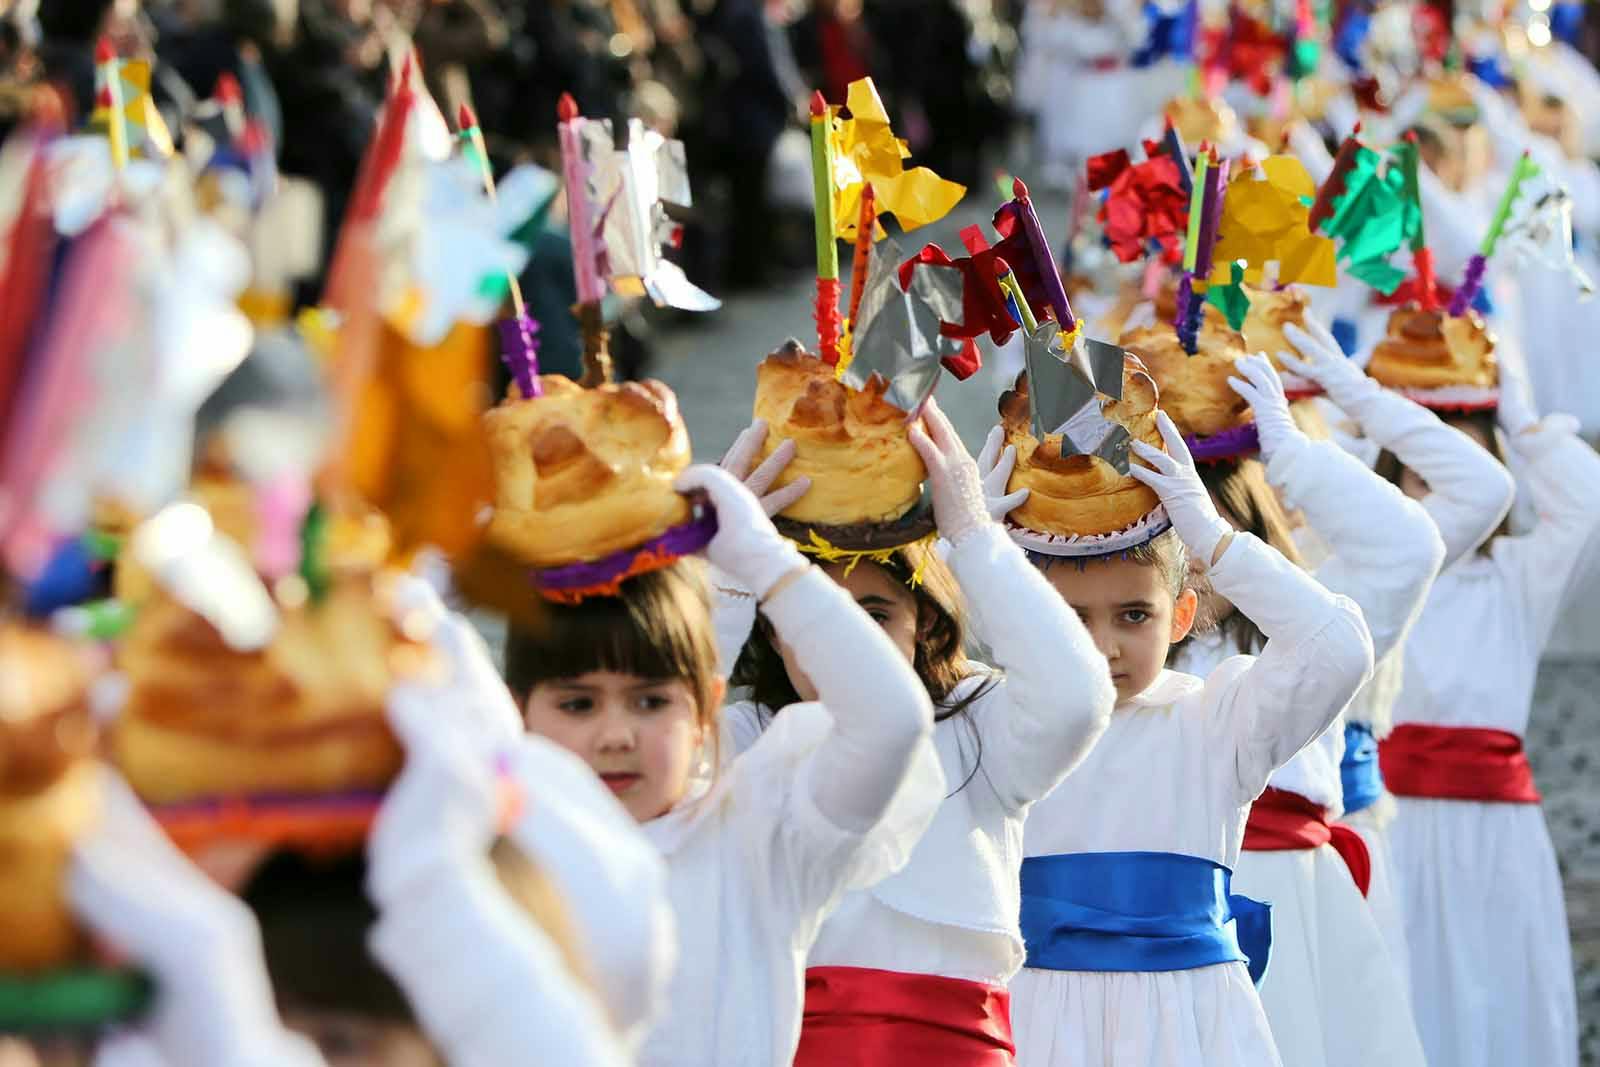 Young girls parading with fogaça cakes on their heads.